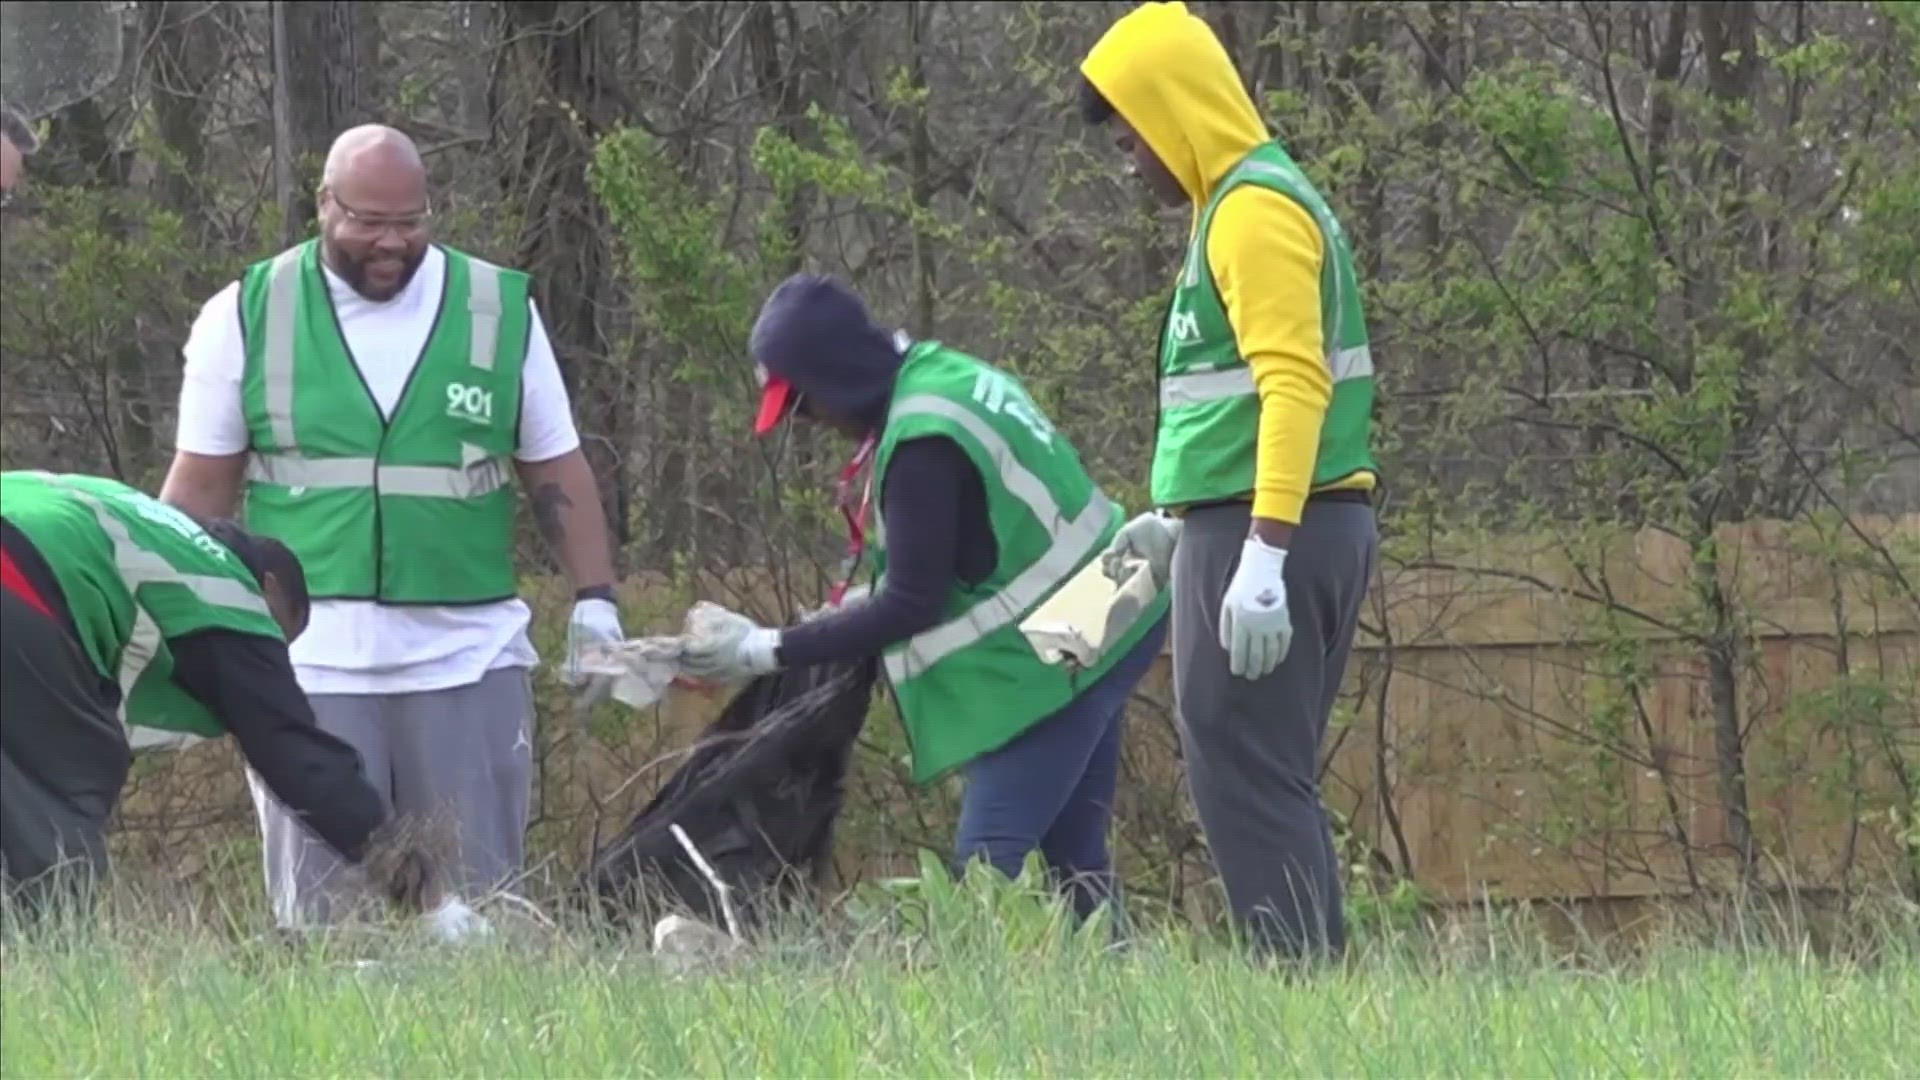 Martin Luther King Jr. College Preparatory High School's youth athletics program and non-profit Youth Villages held a community clean-up in Frayser on Saturday.